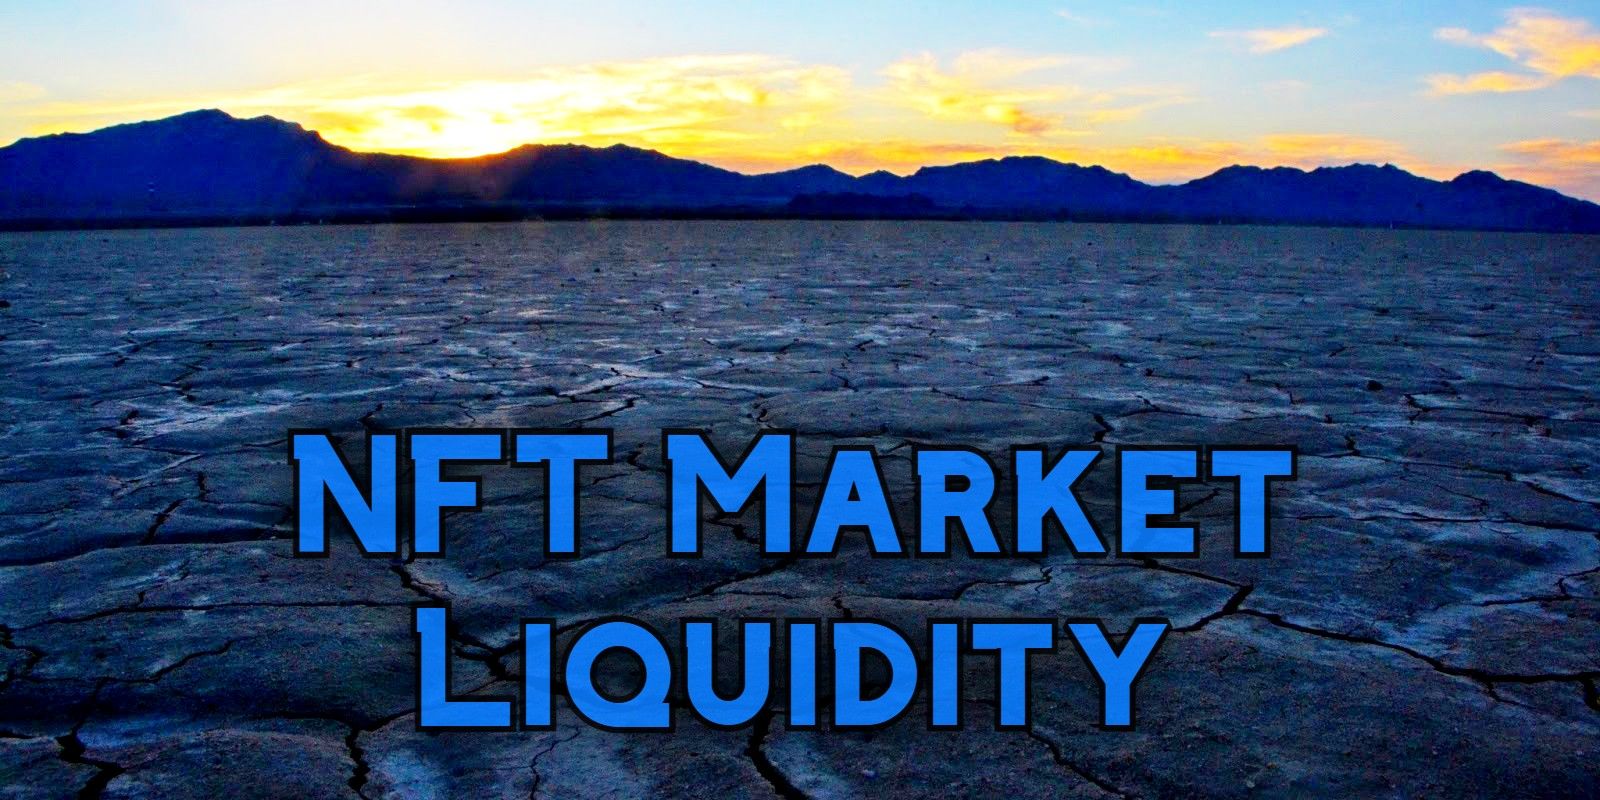 NFT Market Liquidity text over dry lakebed at sunset